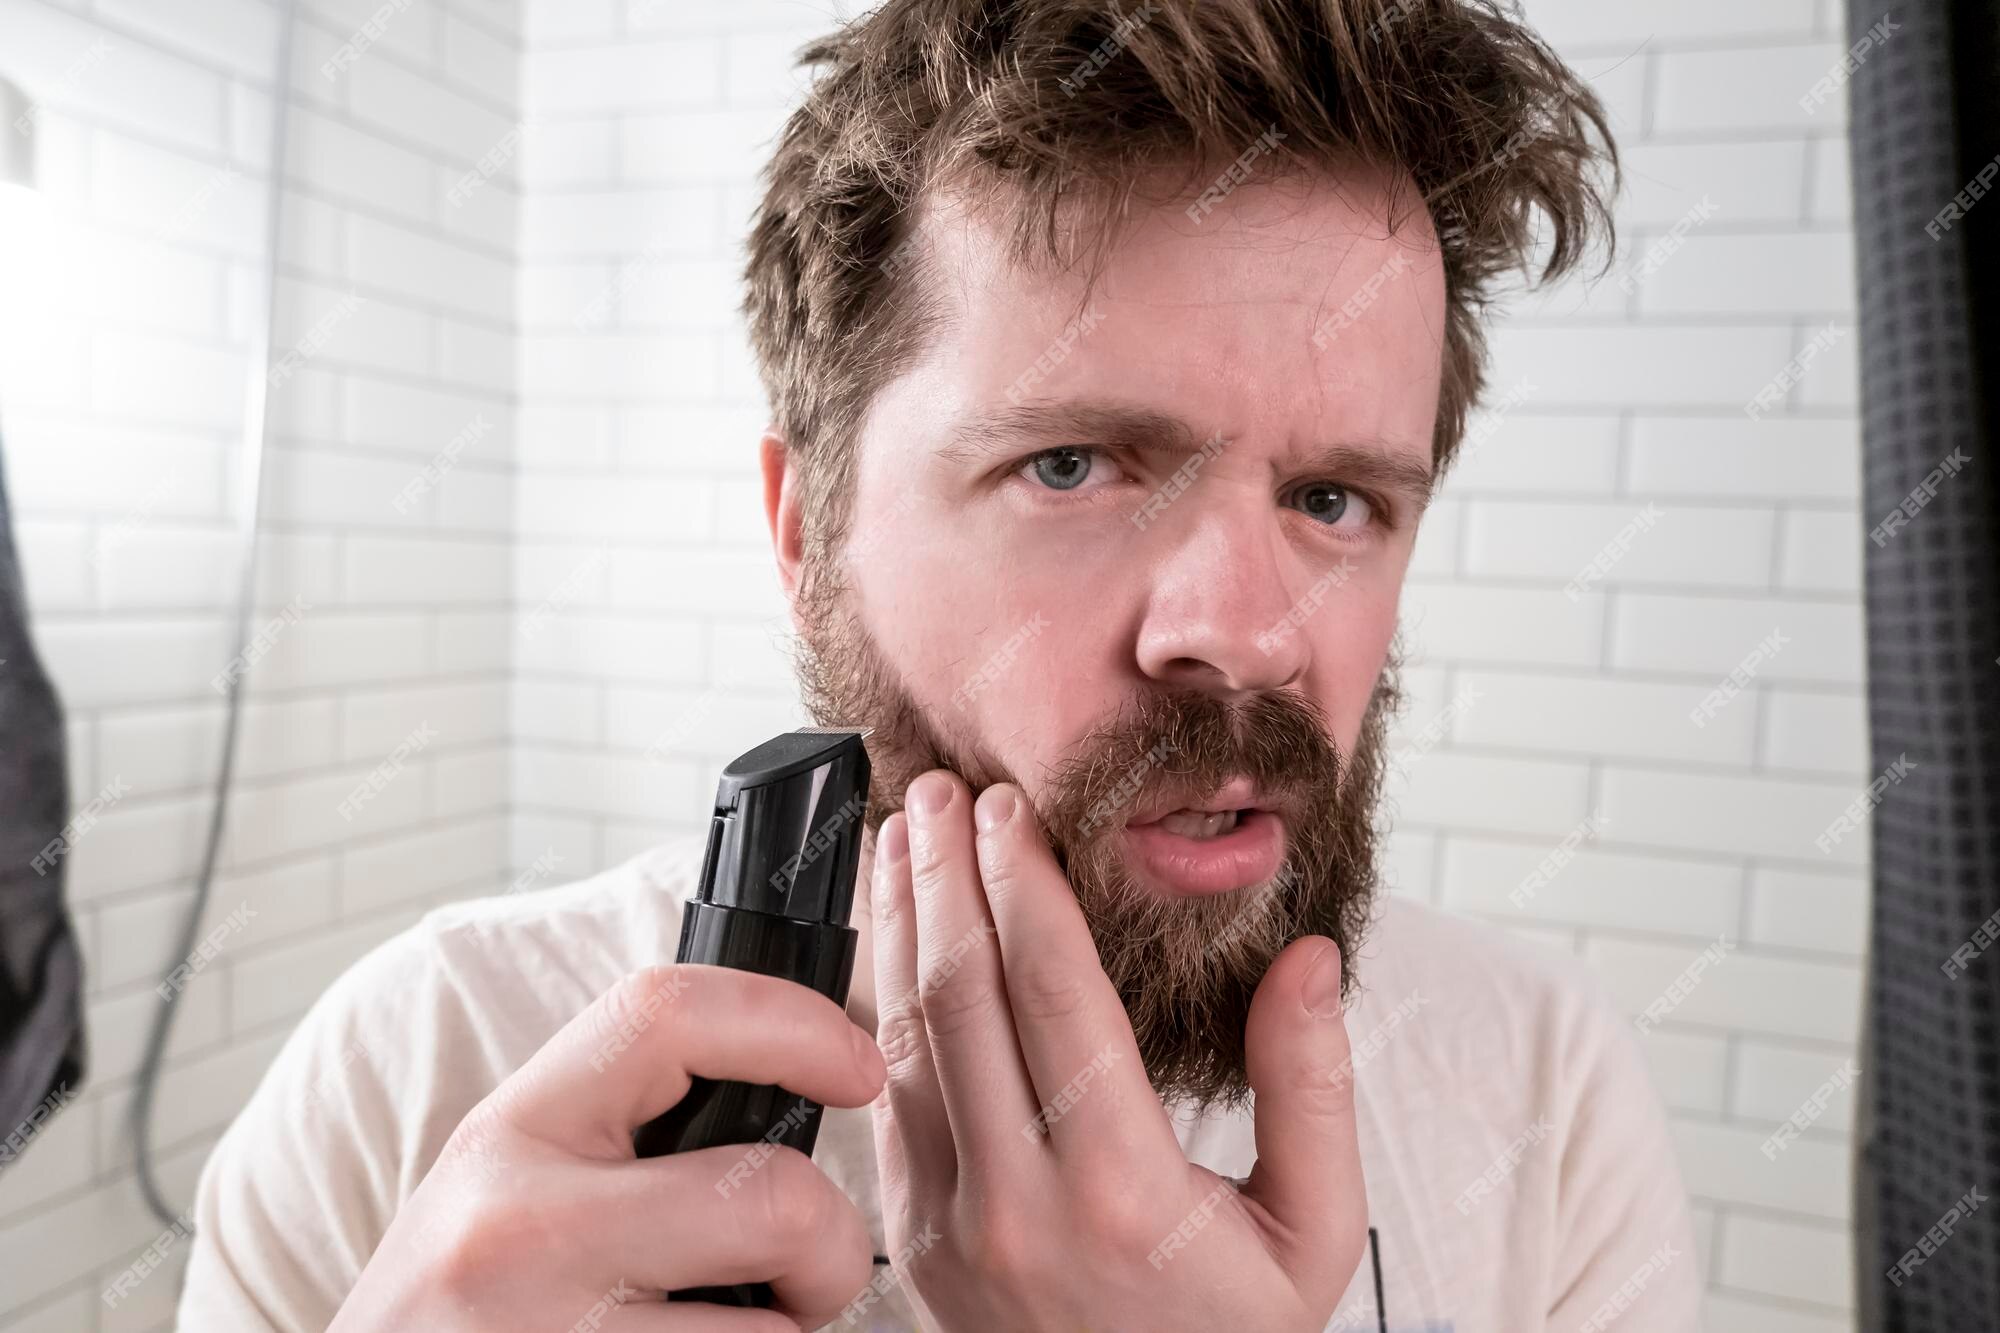 Man Looks Mirror Shaggy Hairstyle Beard Going Make Himself Haircut With Trimmer 262238 2275 ?w=2000